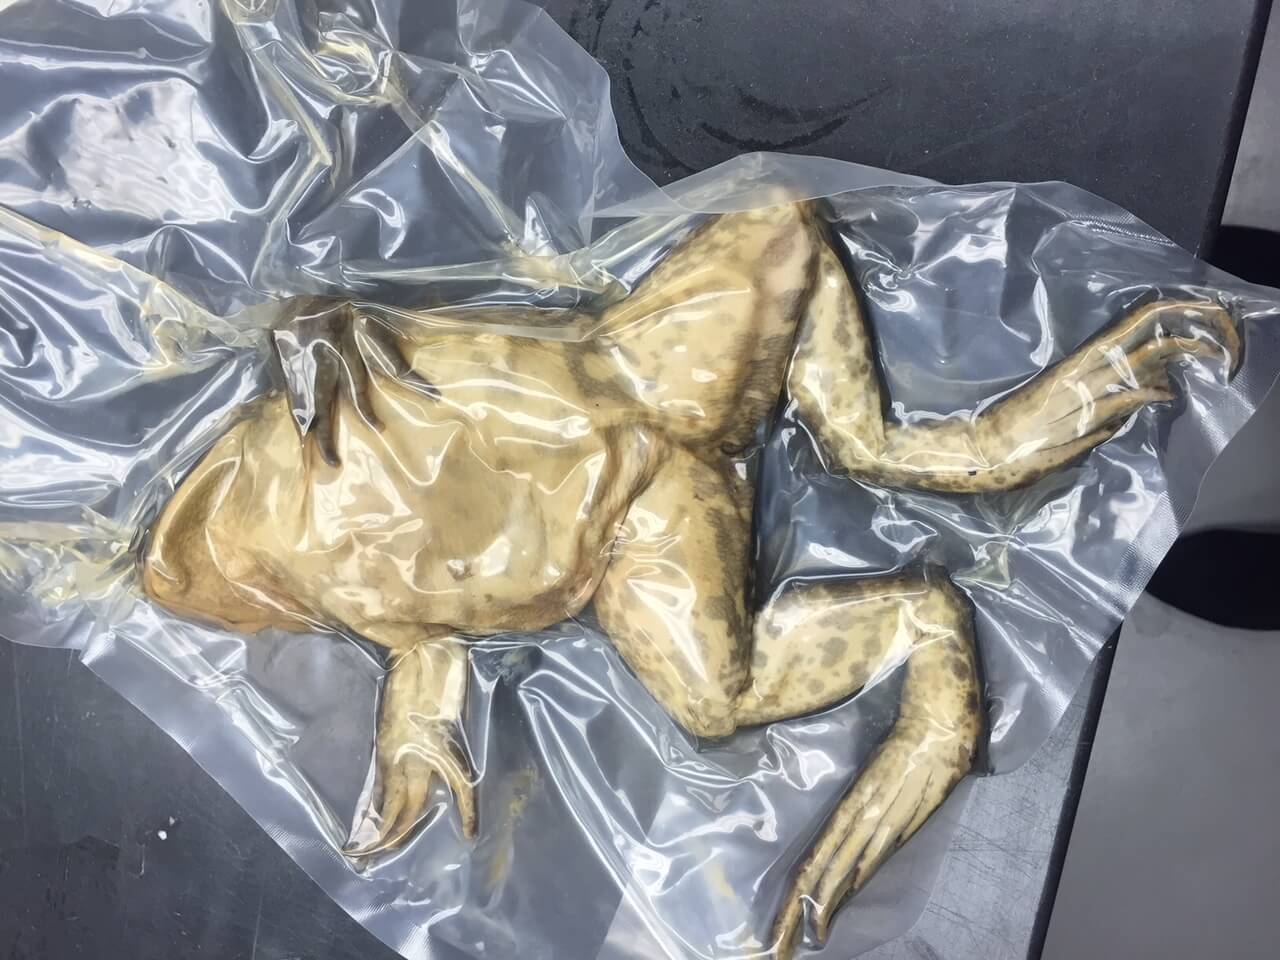 dissection frog in a plastic bag